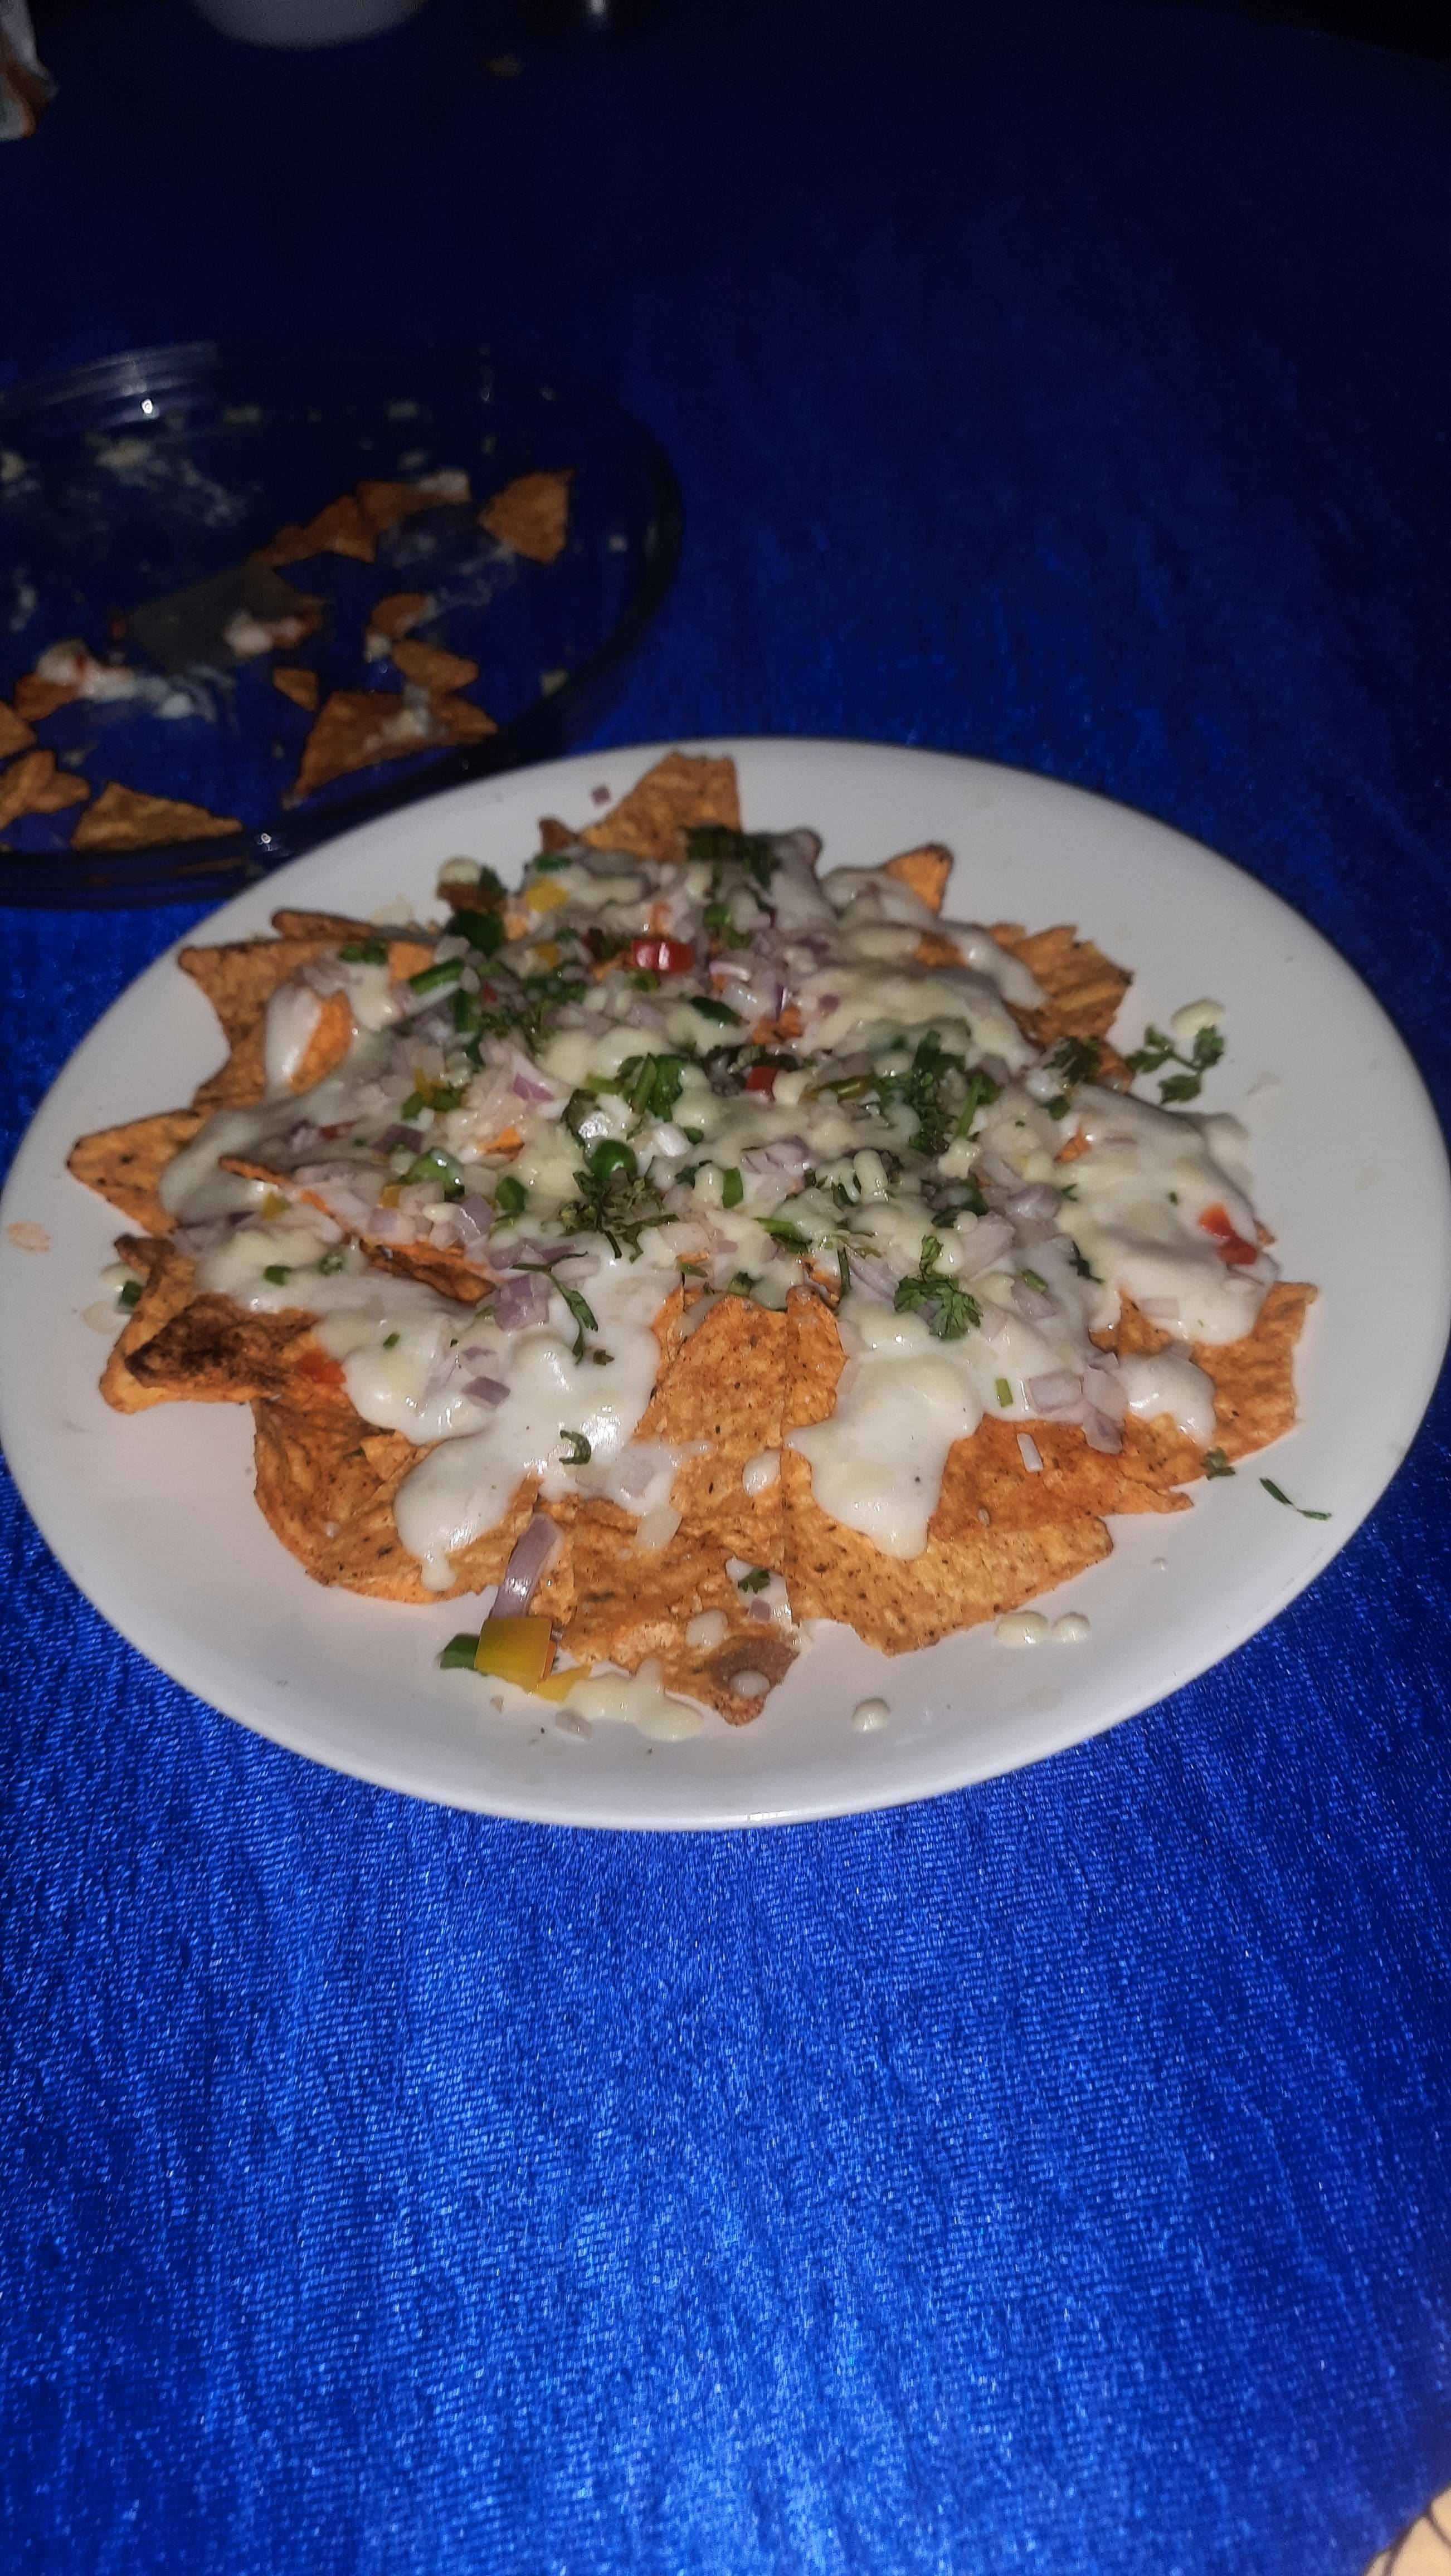 Tasty Cheese Nachos cooked by COOX chefs cooks during occasions parties events at home